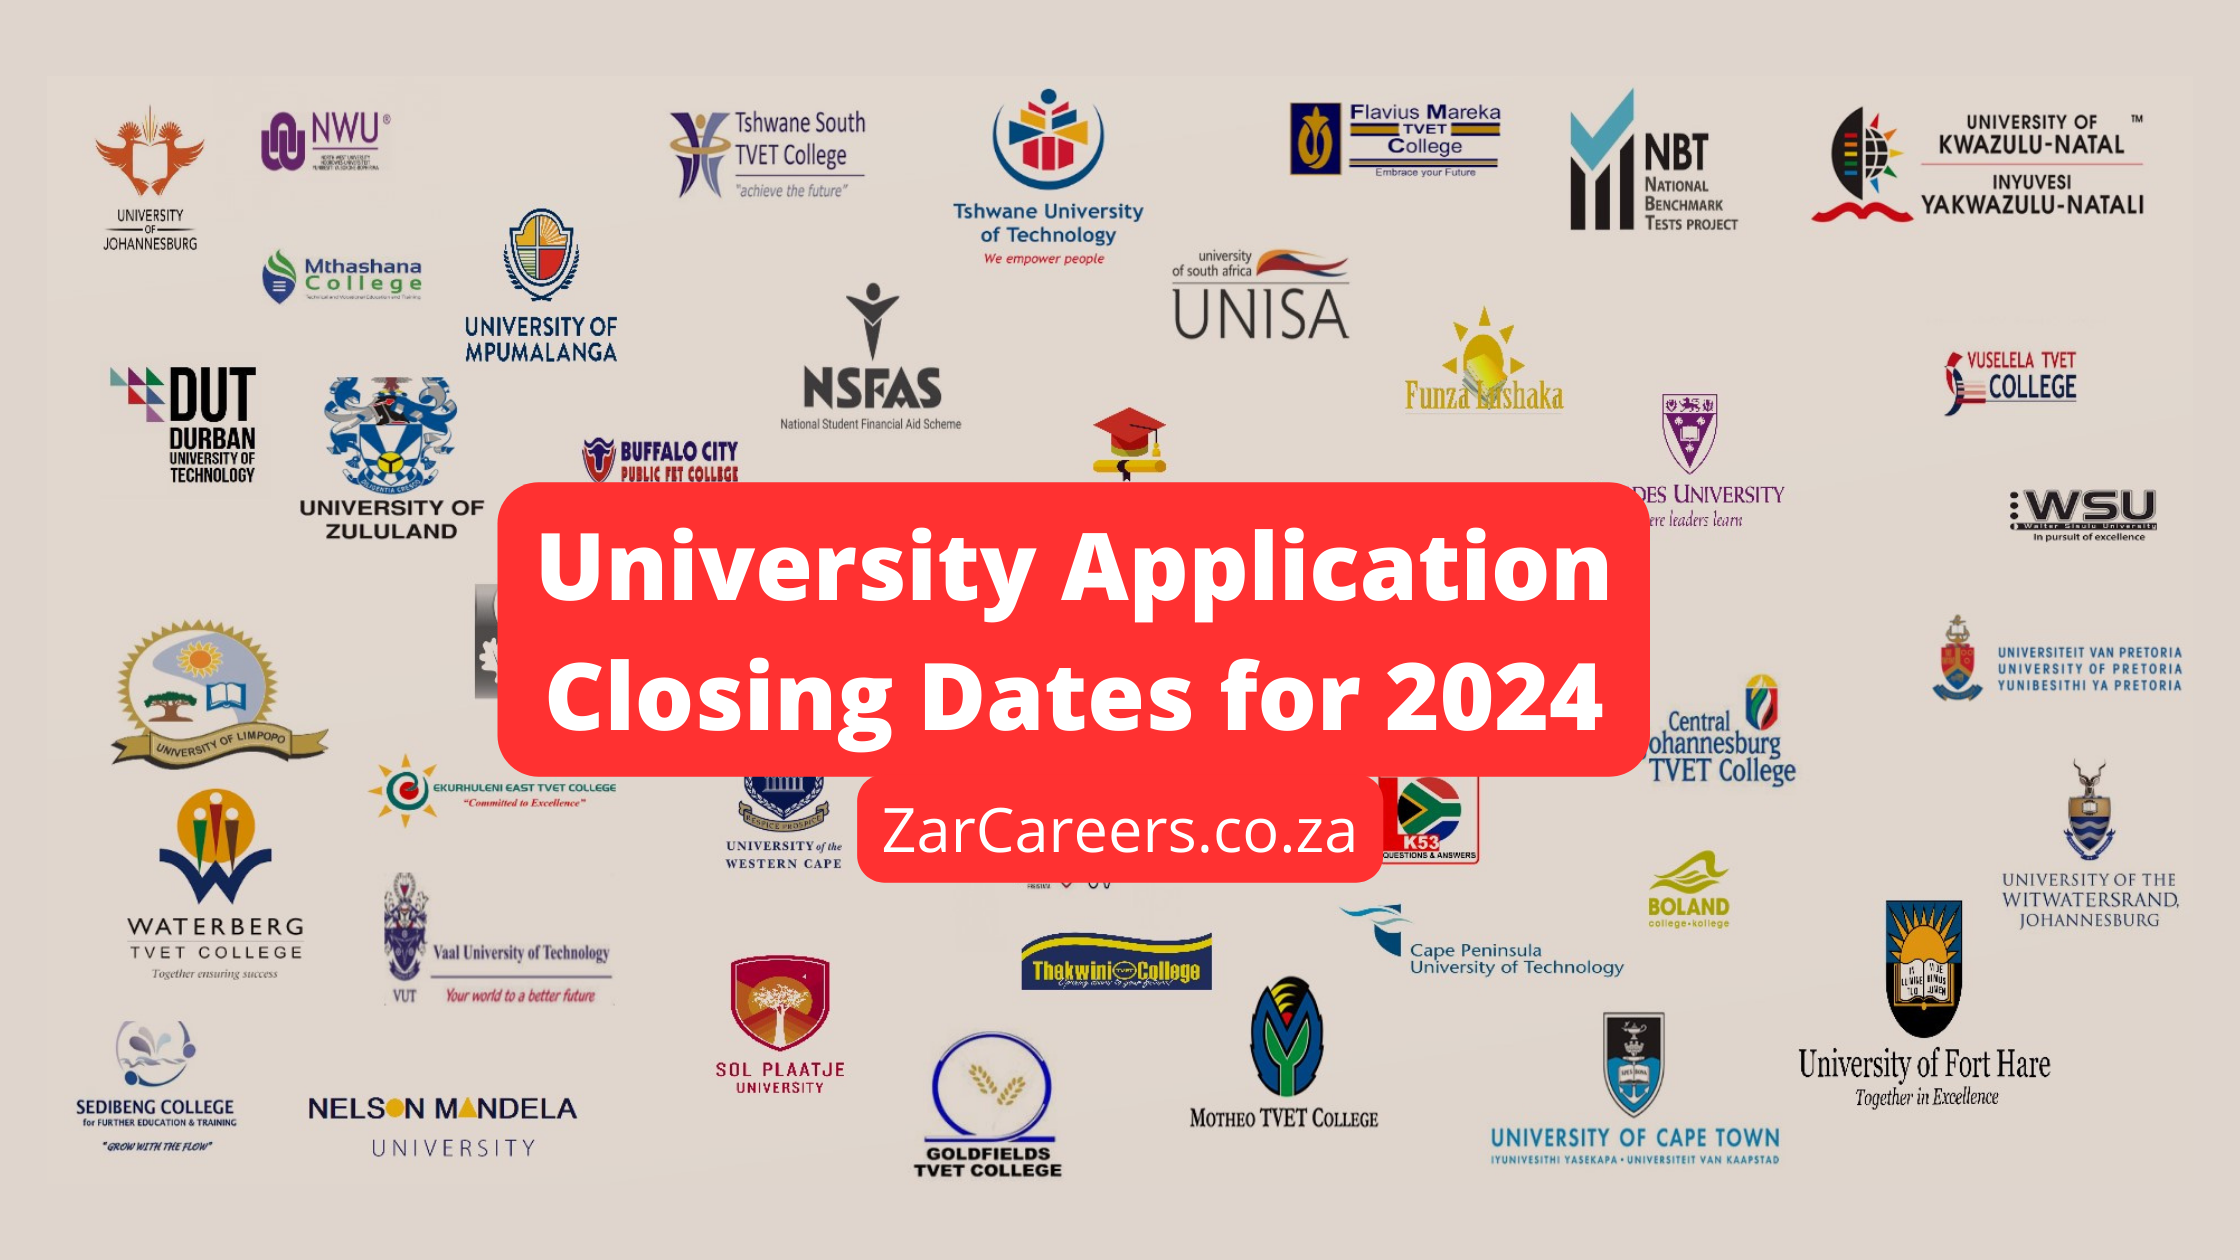 Closing Dates for University Applications for 2024 ZAR Careers